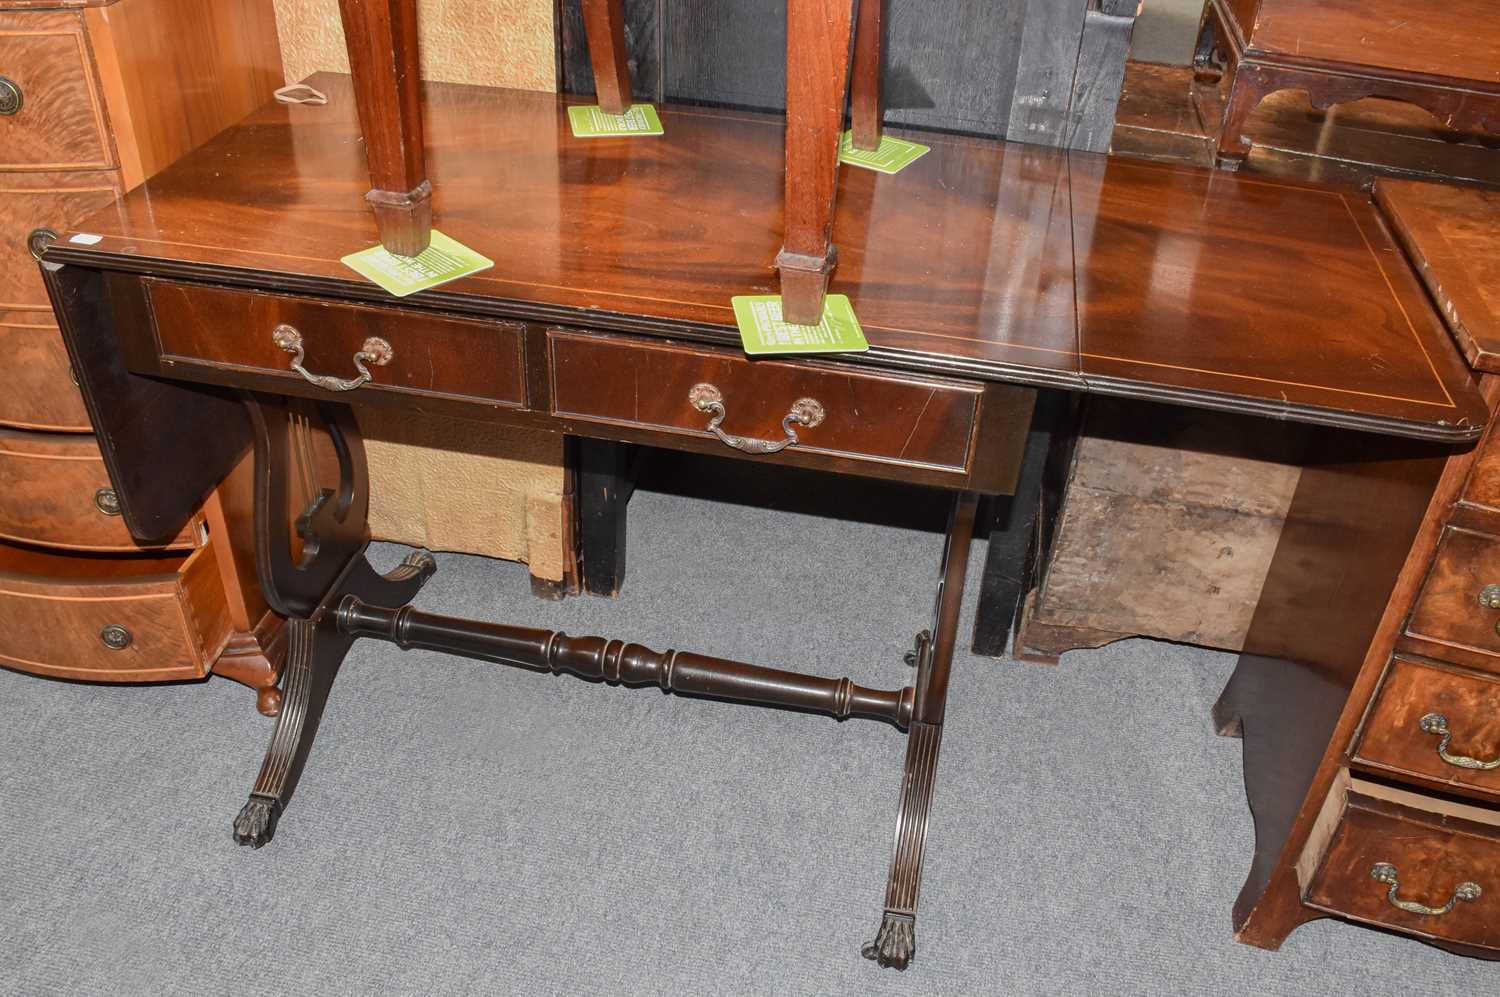 A Reproduction Mahogany Sofa Table, 90cm (closed) by 50cm by 76cm A 19th Century Tripod Table,